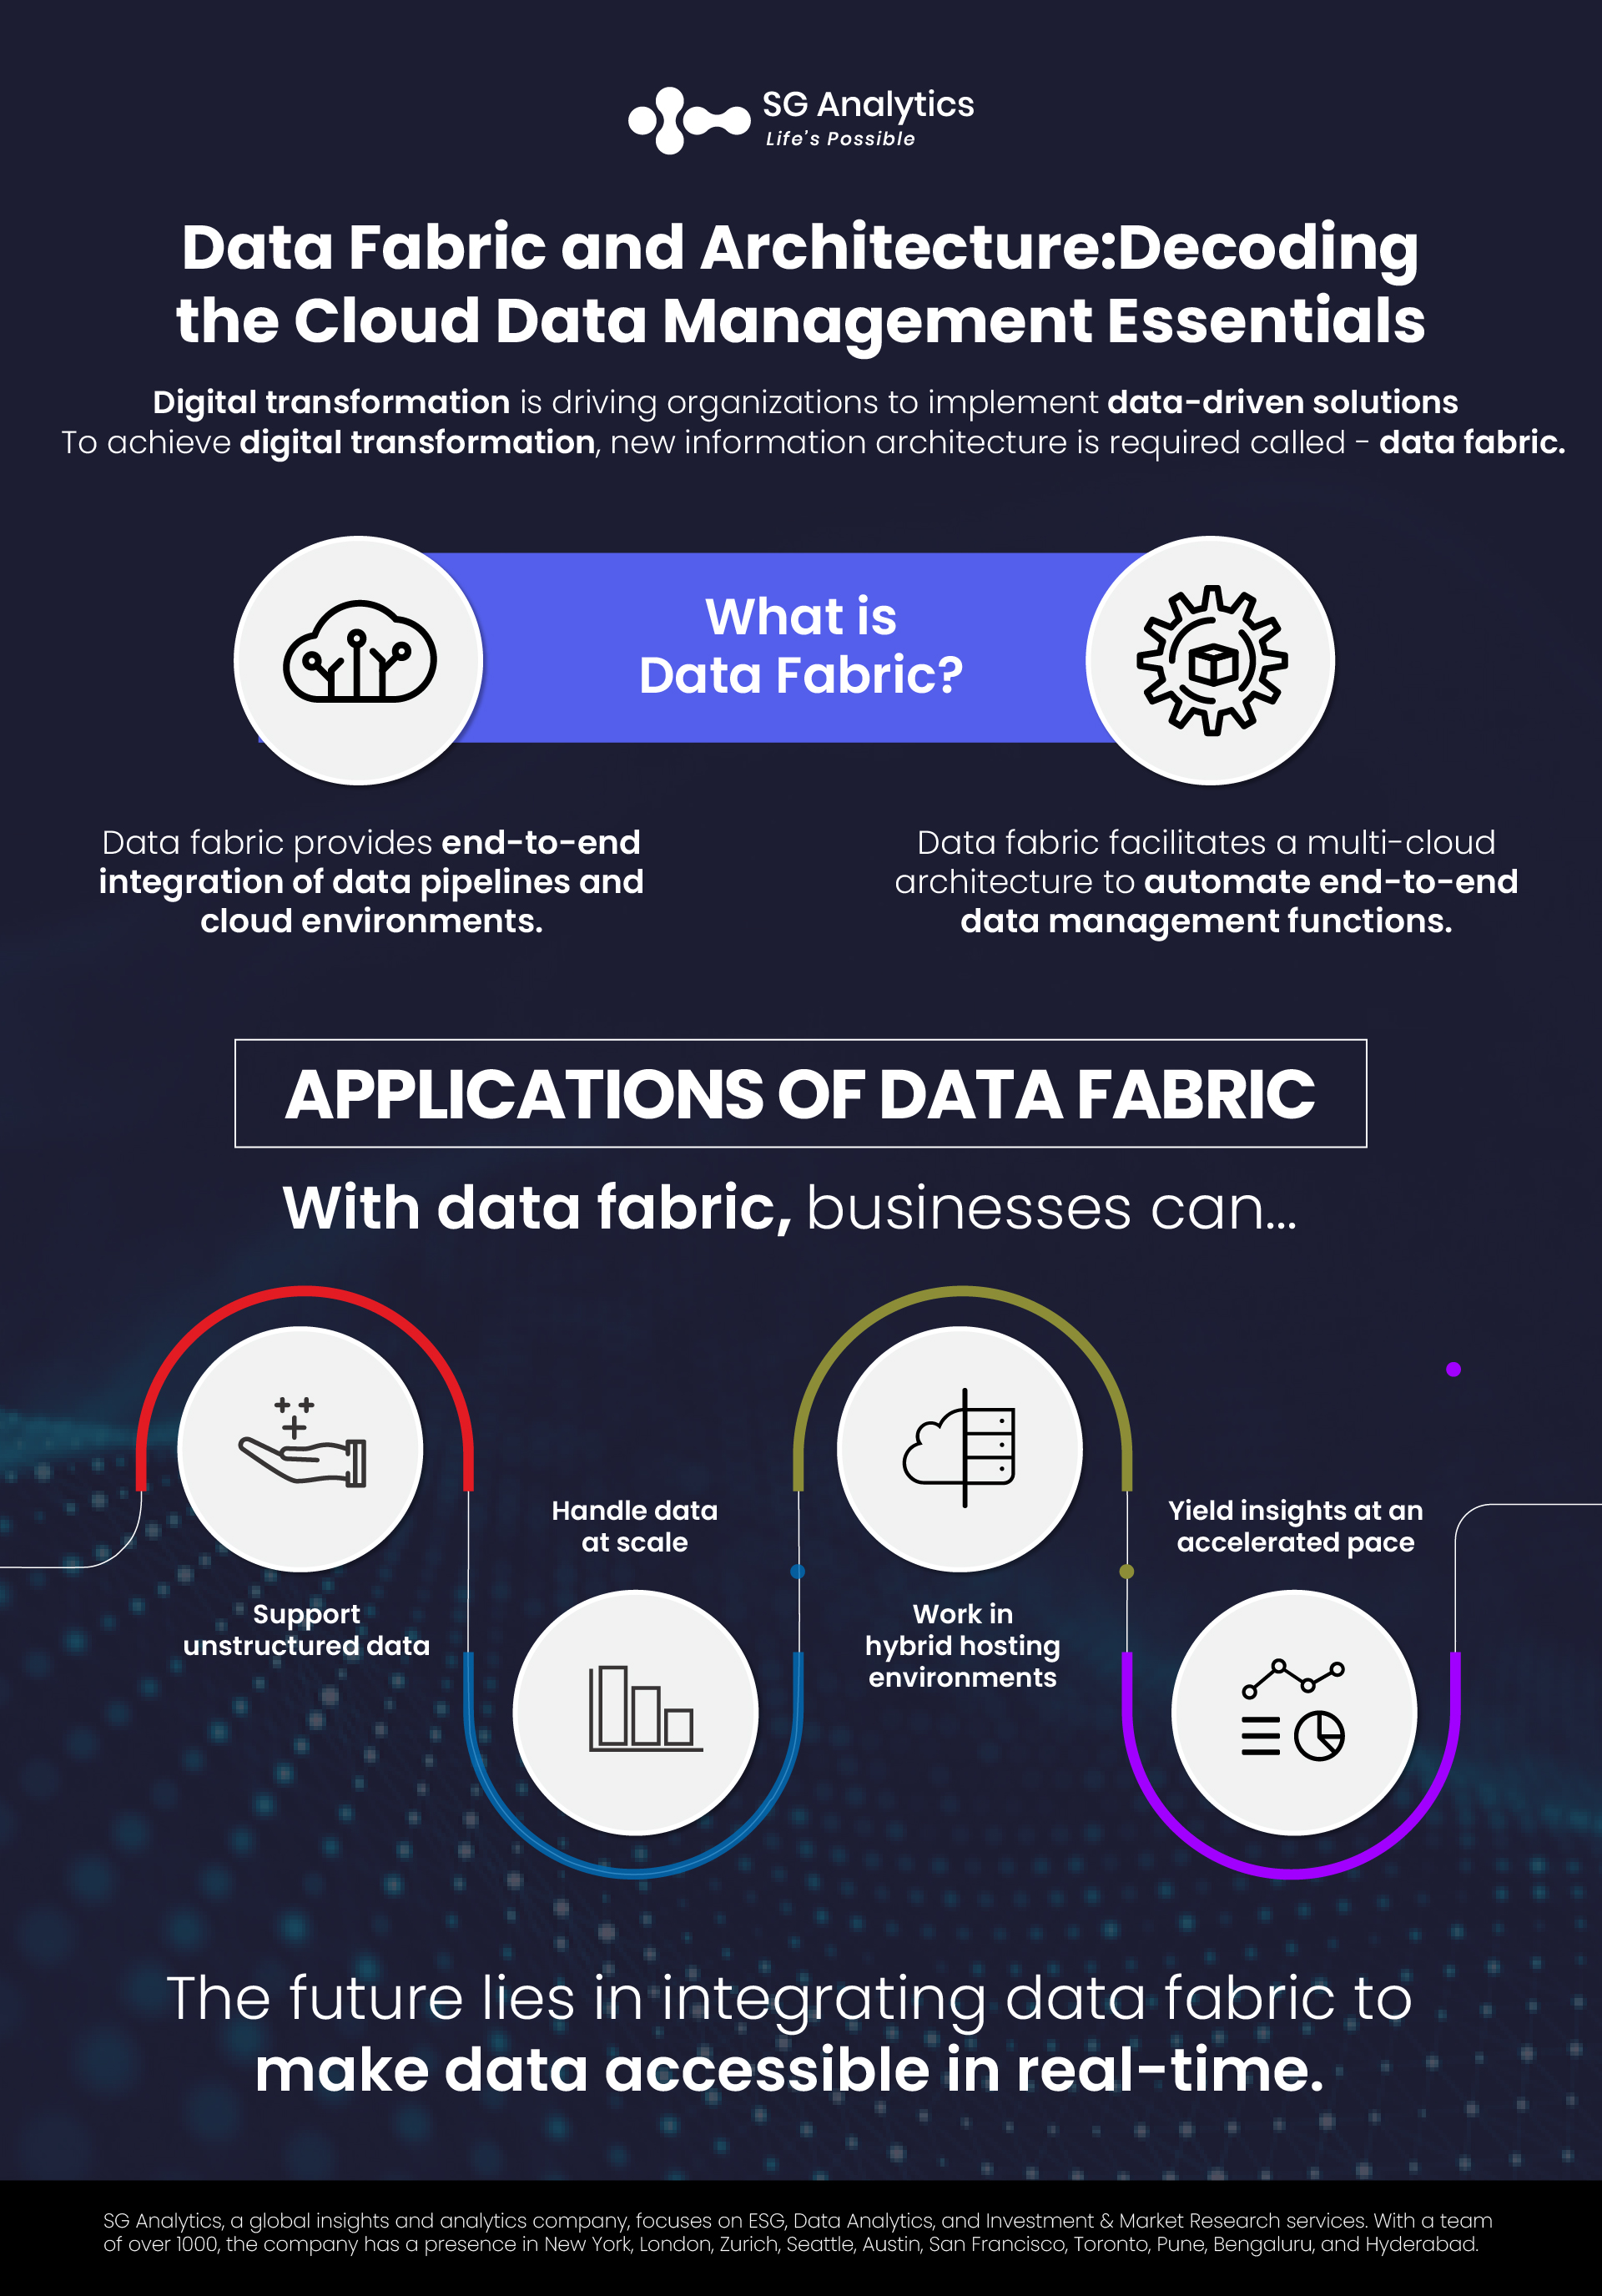 SG Analytics_Data Fabric and Architecture Decoding the Cloud Data Management Essentials